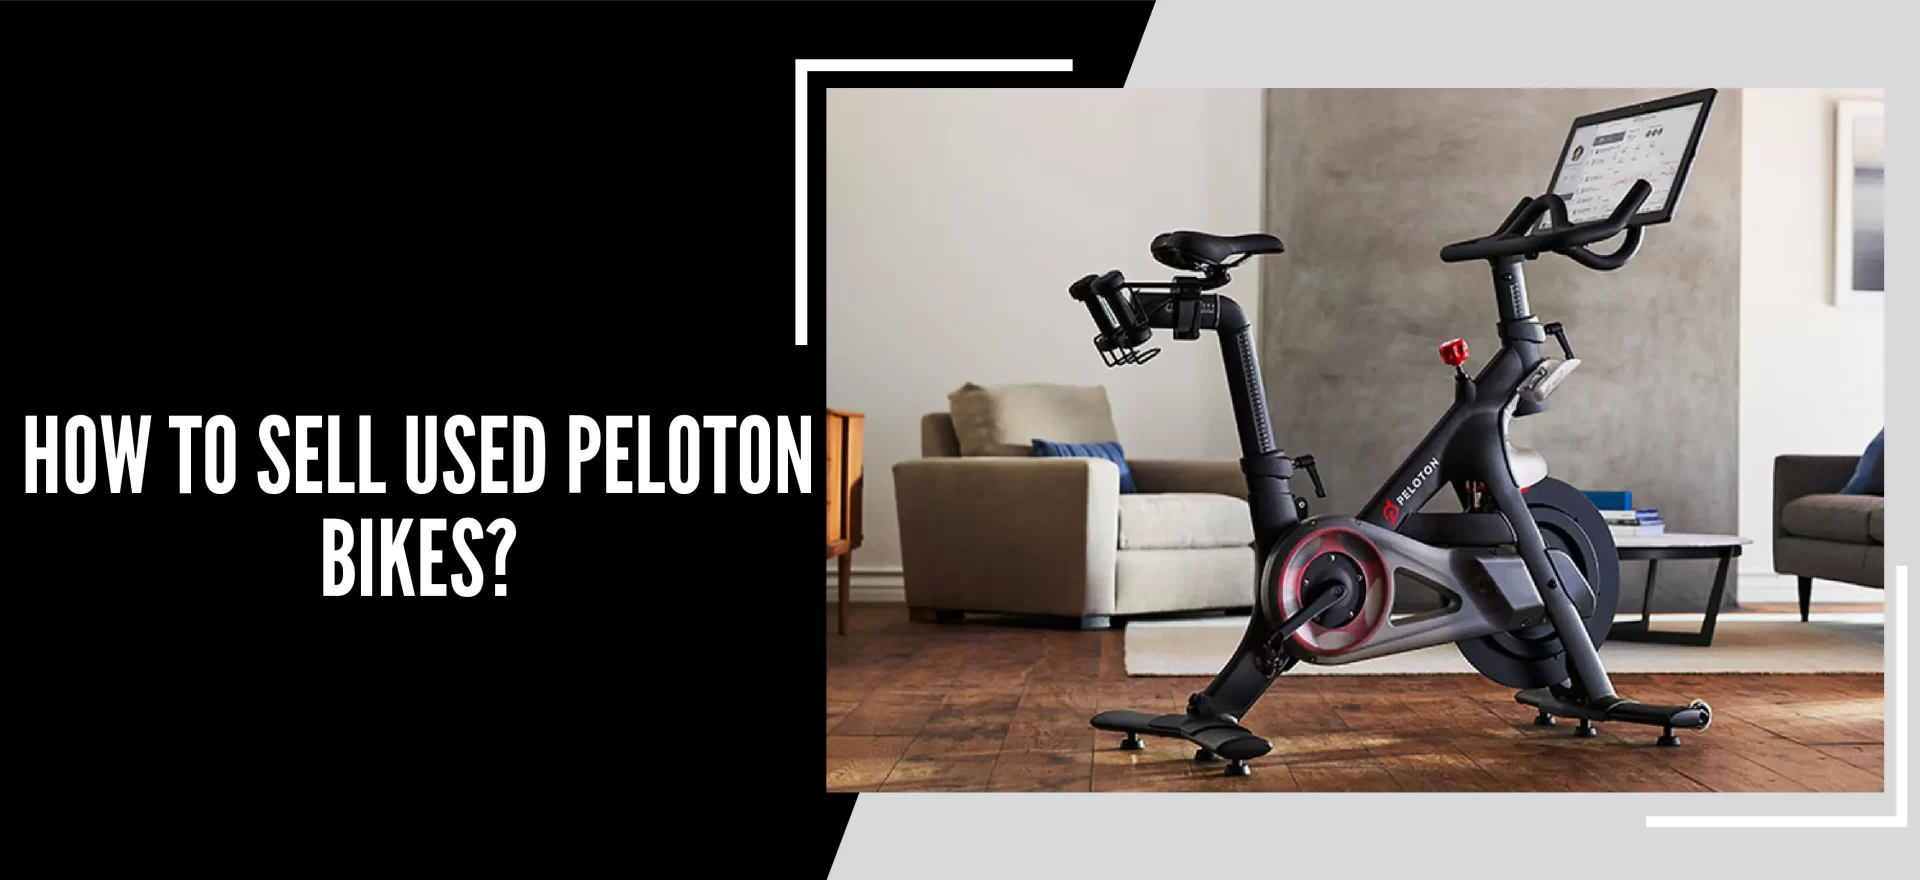 How To Sell Used Peloton Bikes